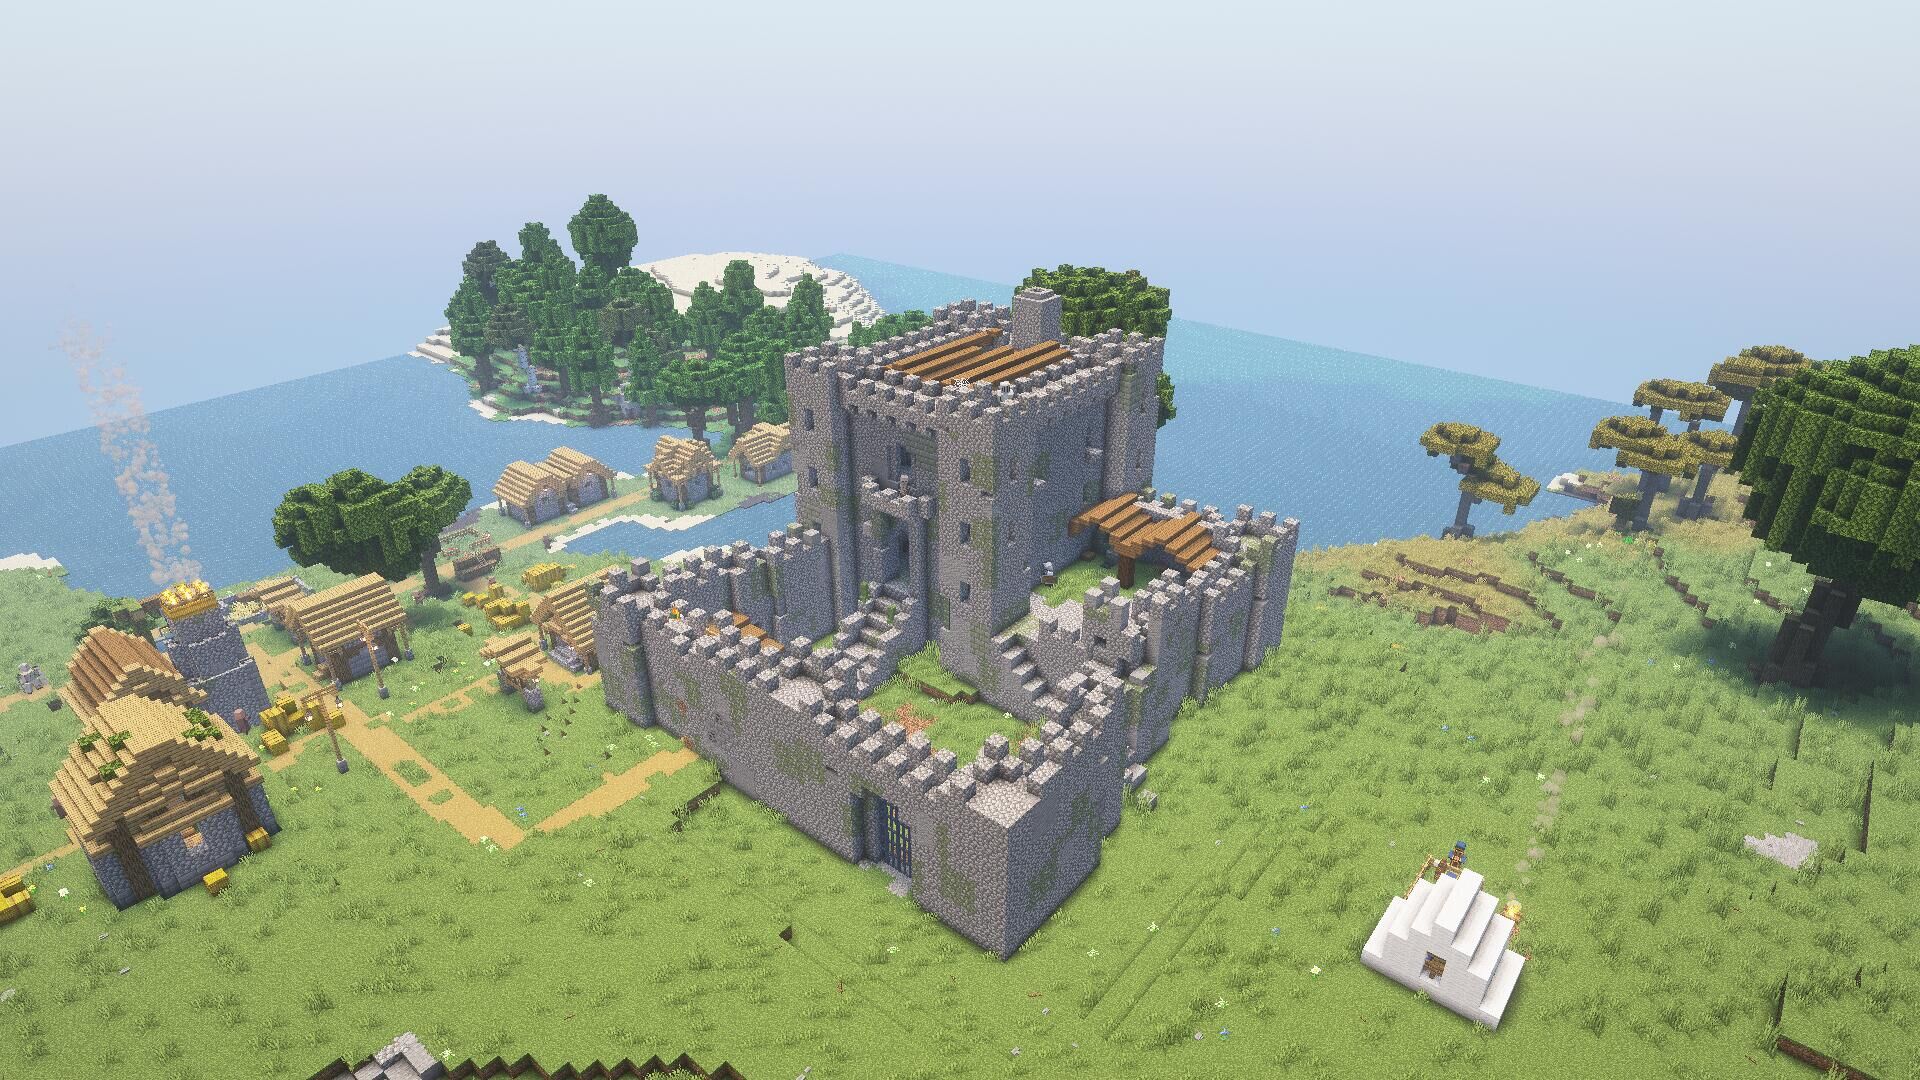 Camps. Castles. Carriages. Minecraft Data Pack